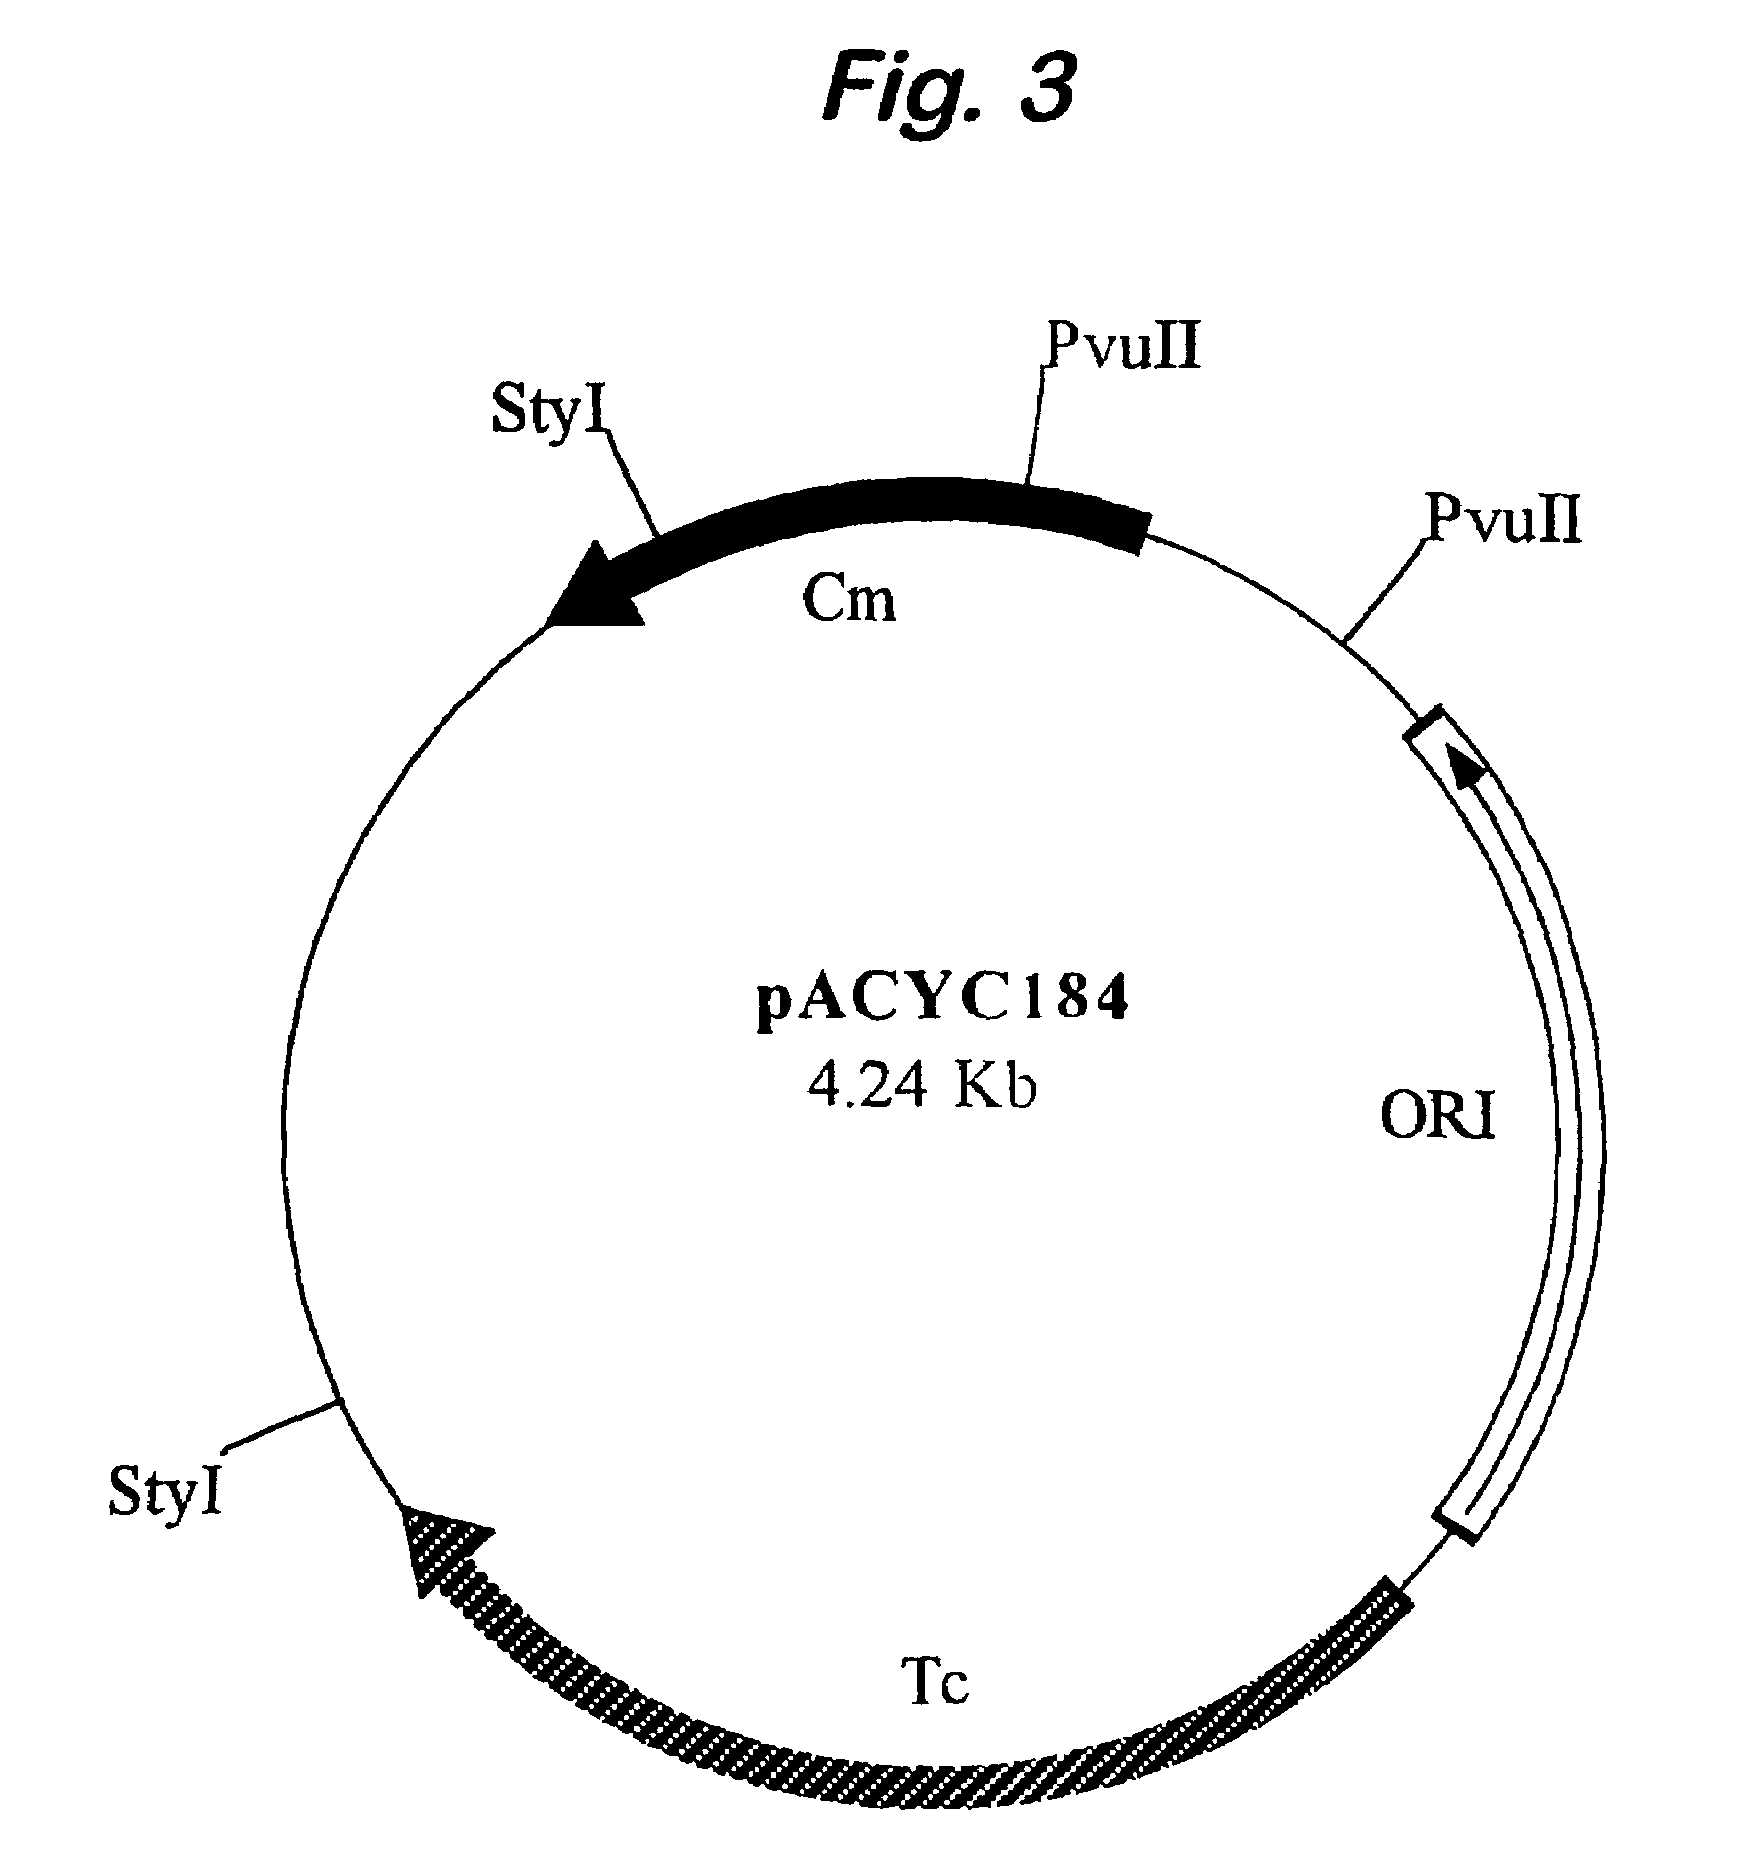 Expression control using variable intergenic sequences